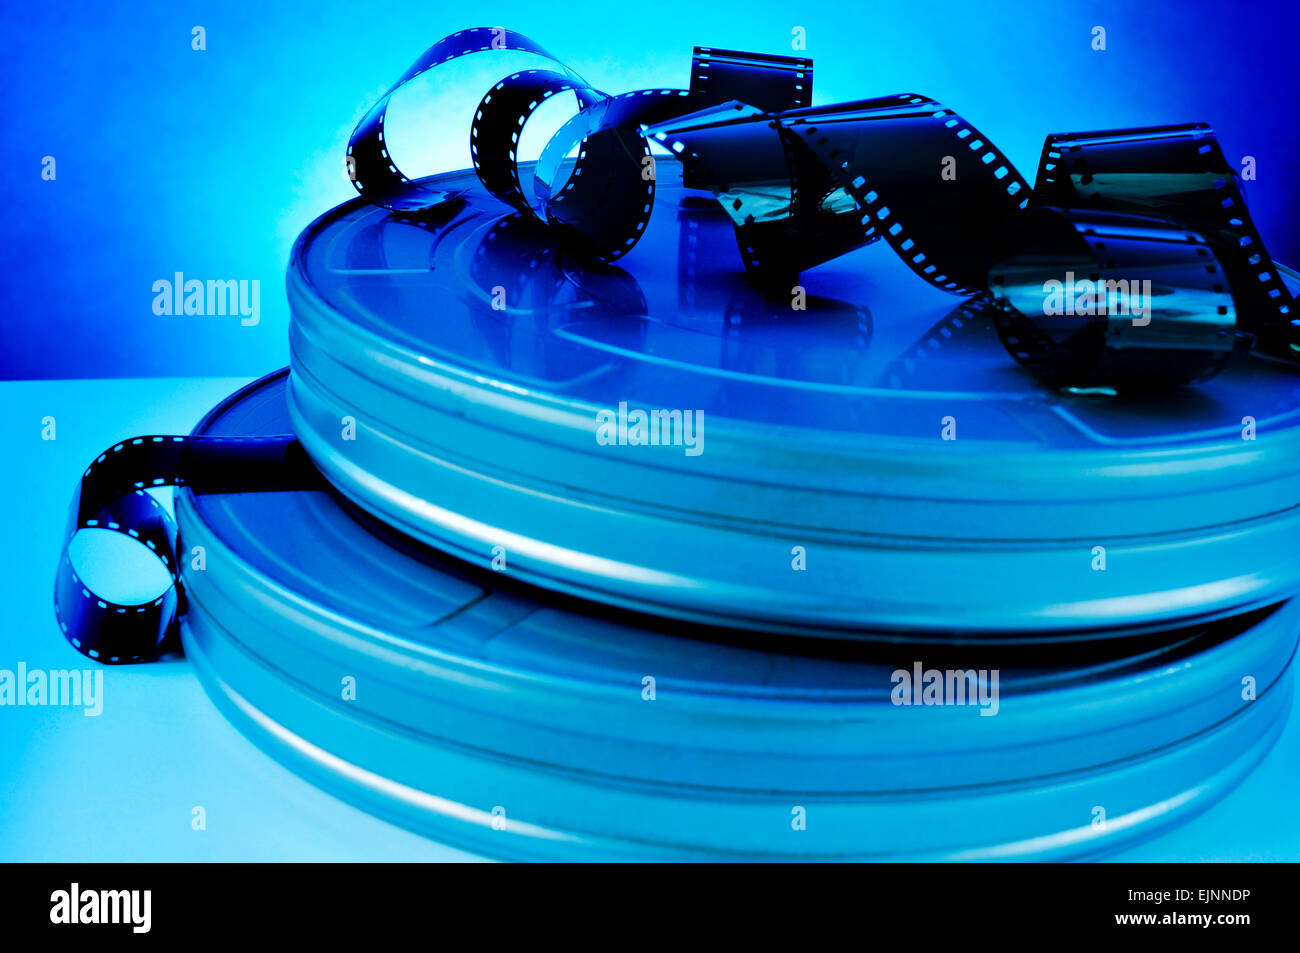 A reel of film sitting on top of a table. Film reel movie reel. - PICRYL -  Public Domain Media Search Engine Public Domain Search